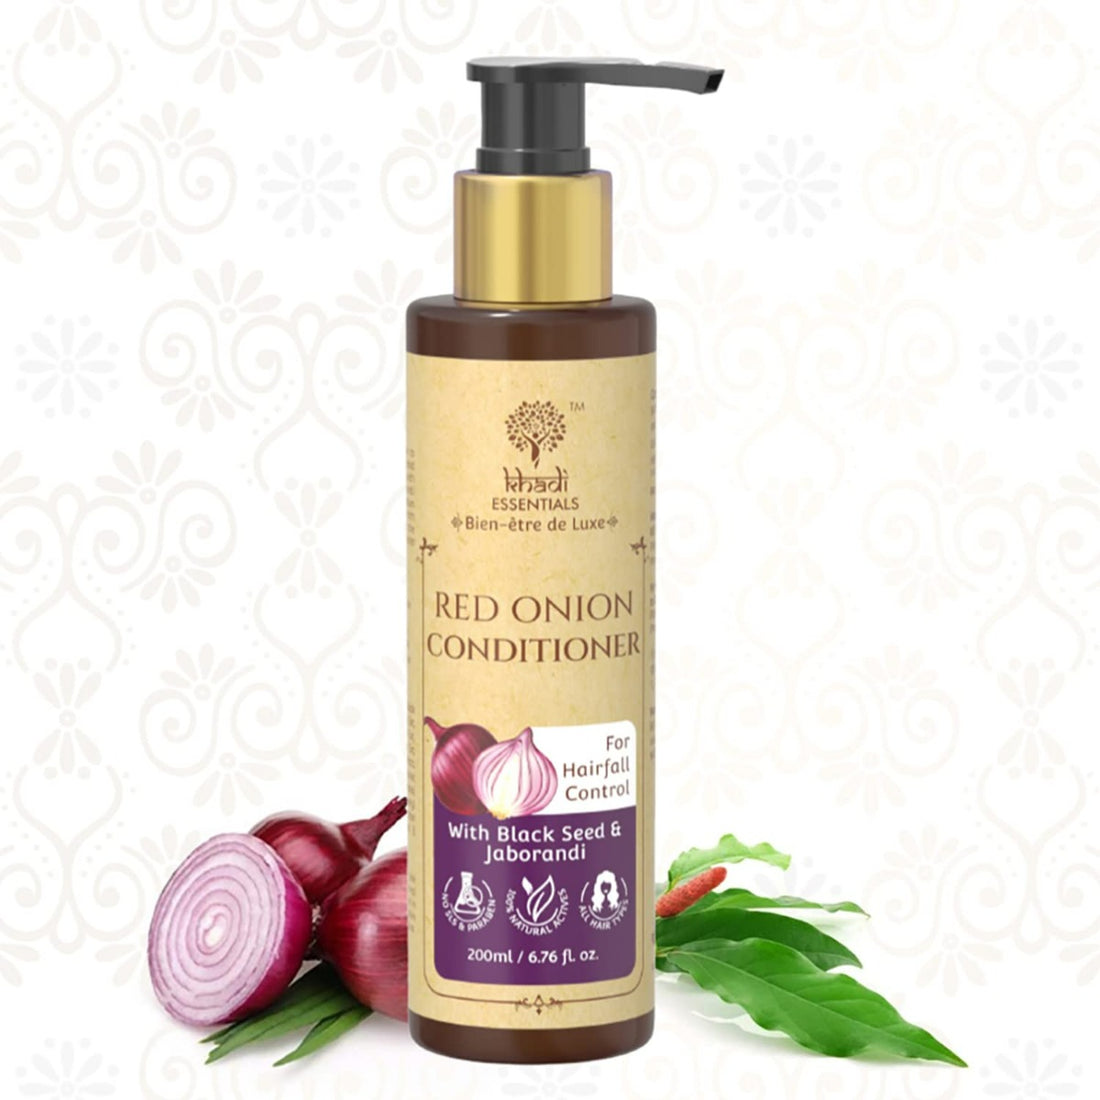 Khadi Essentials Red Onion Conditioner for Hair fall Control (200ml)